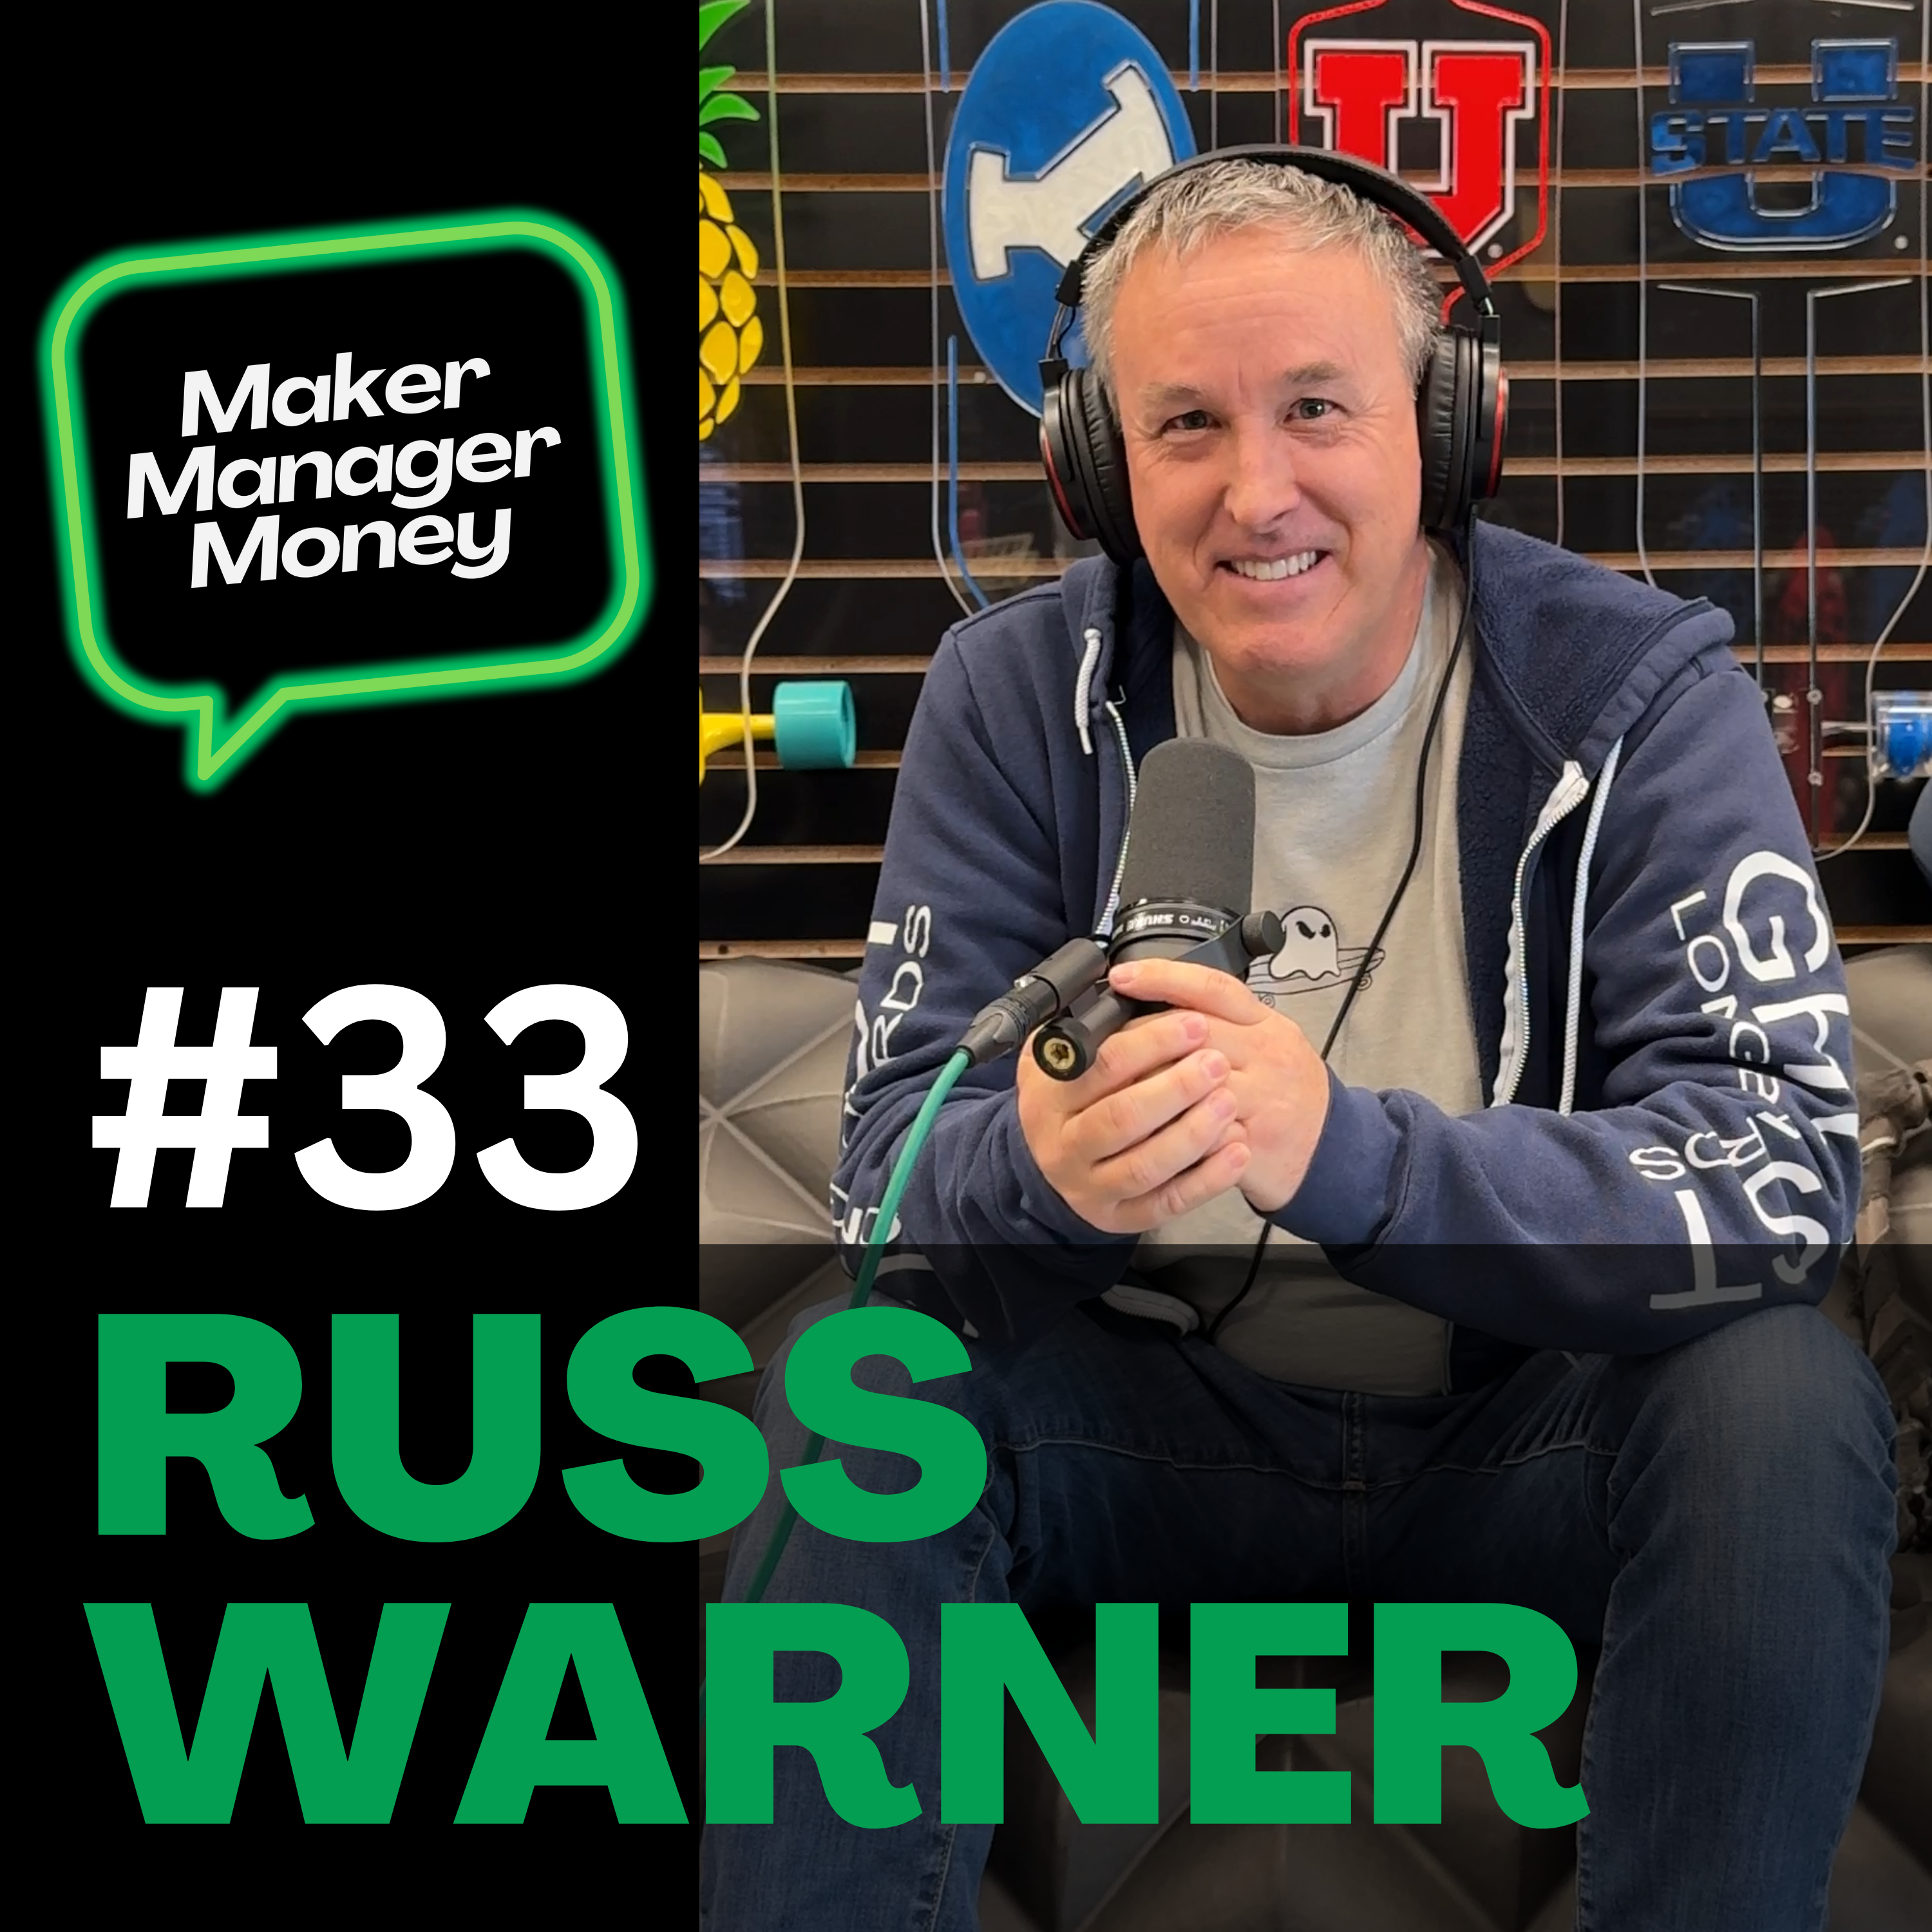 Russ Warner: Skateboarding to Success – A No Excuses Entrepreneurial Journey